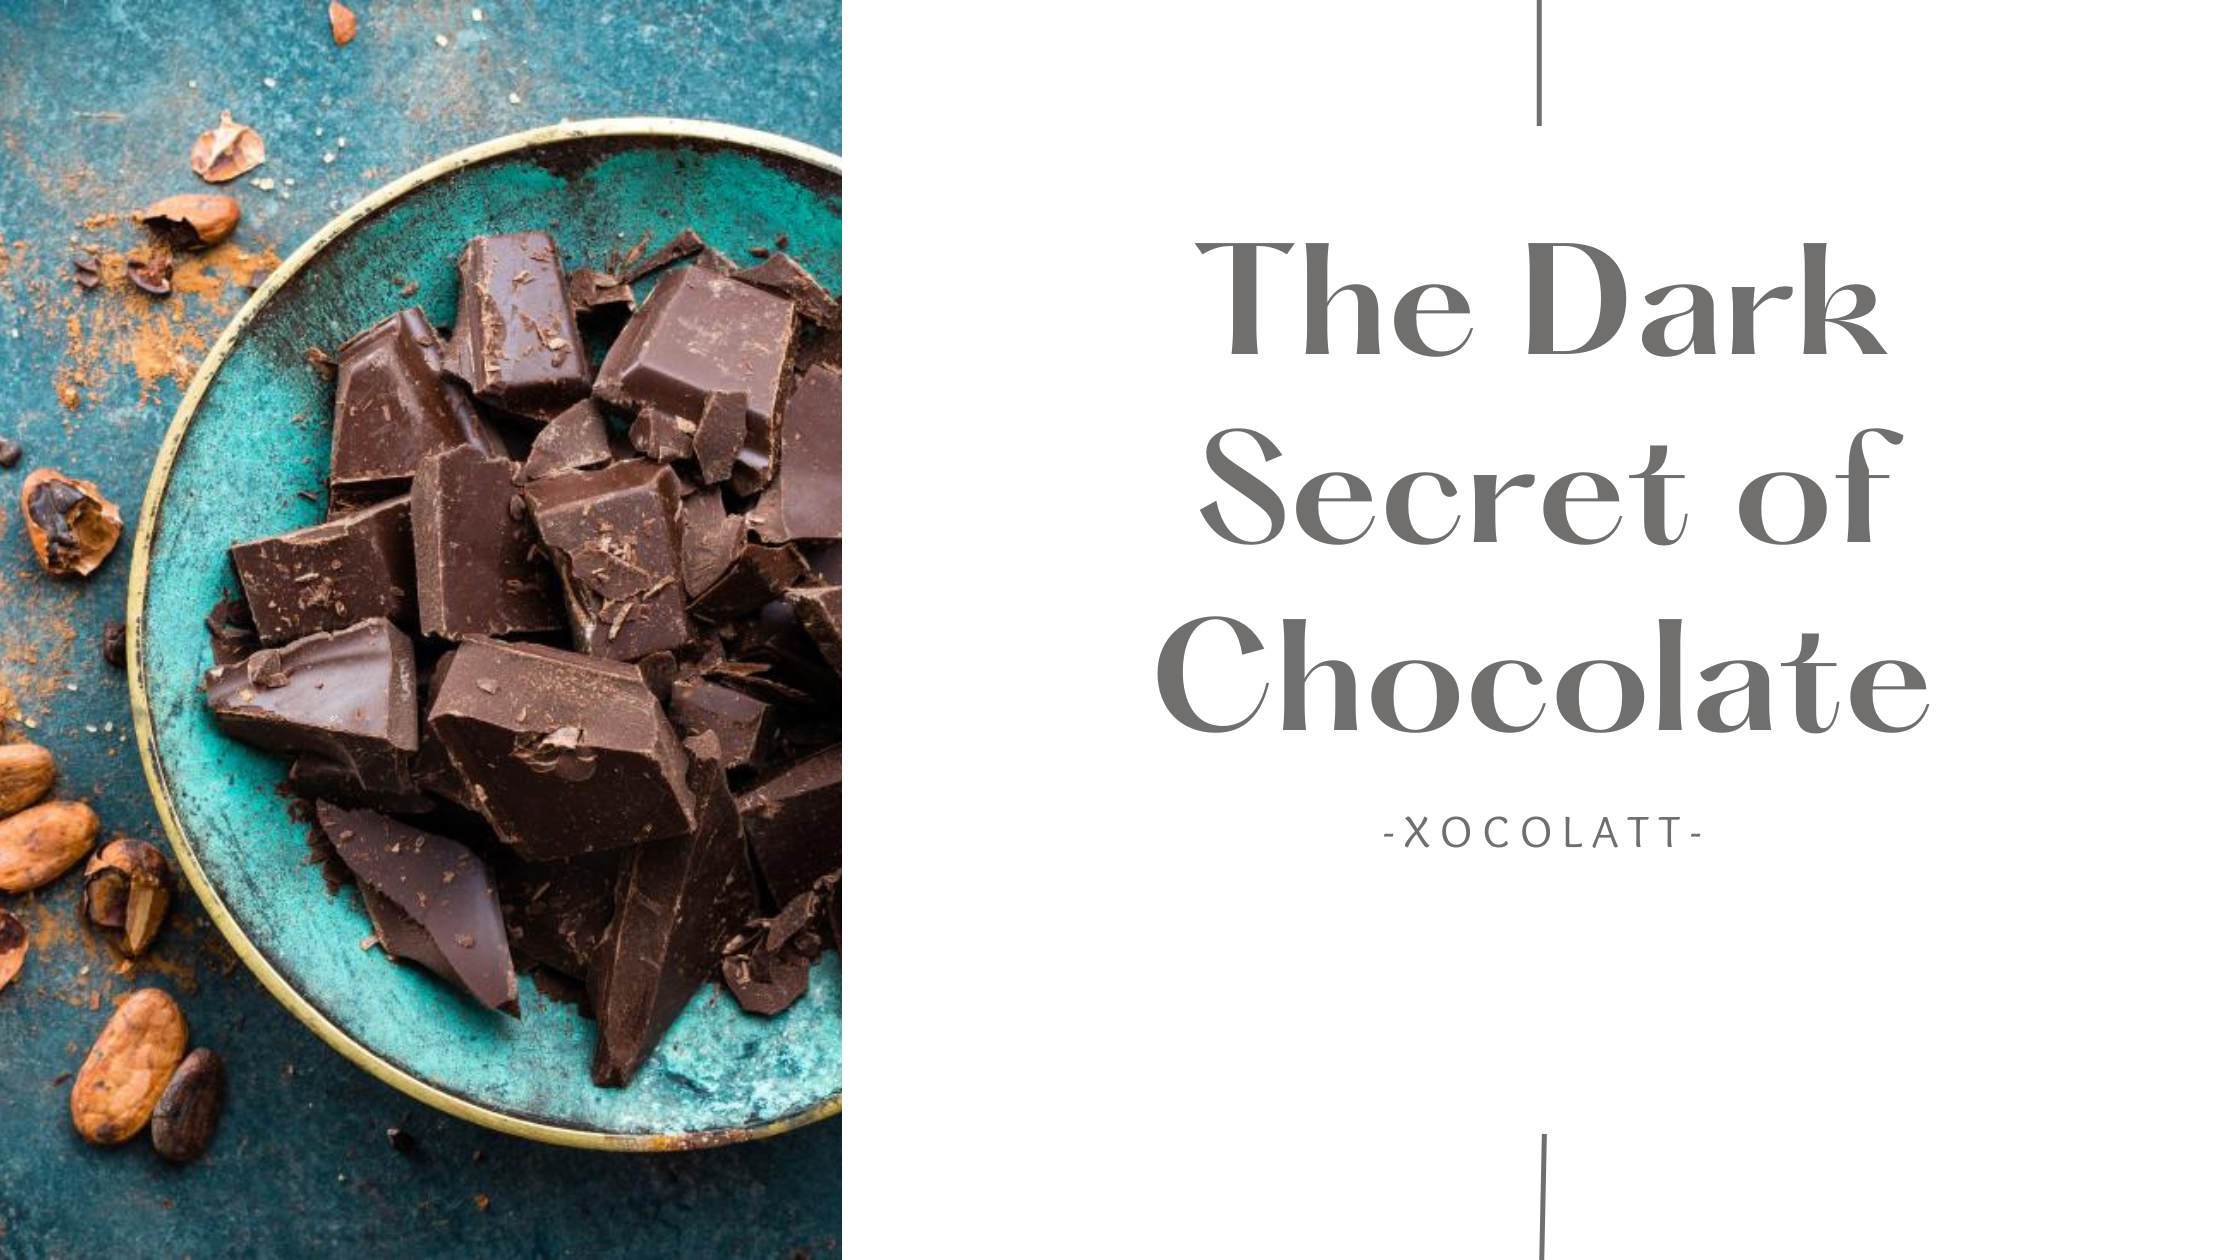 Pieces of dark chocolate in a blue bowl surrounded by cacao beans. Title reads 'The Dark Secret of Chocolate' to offer first glimpse into chocolate health benefits.